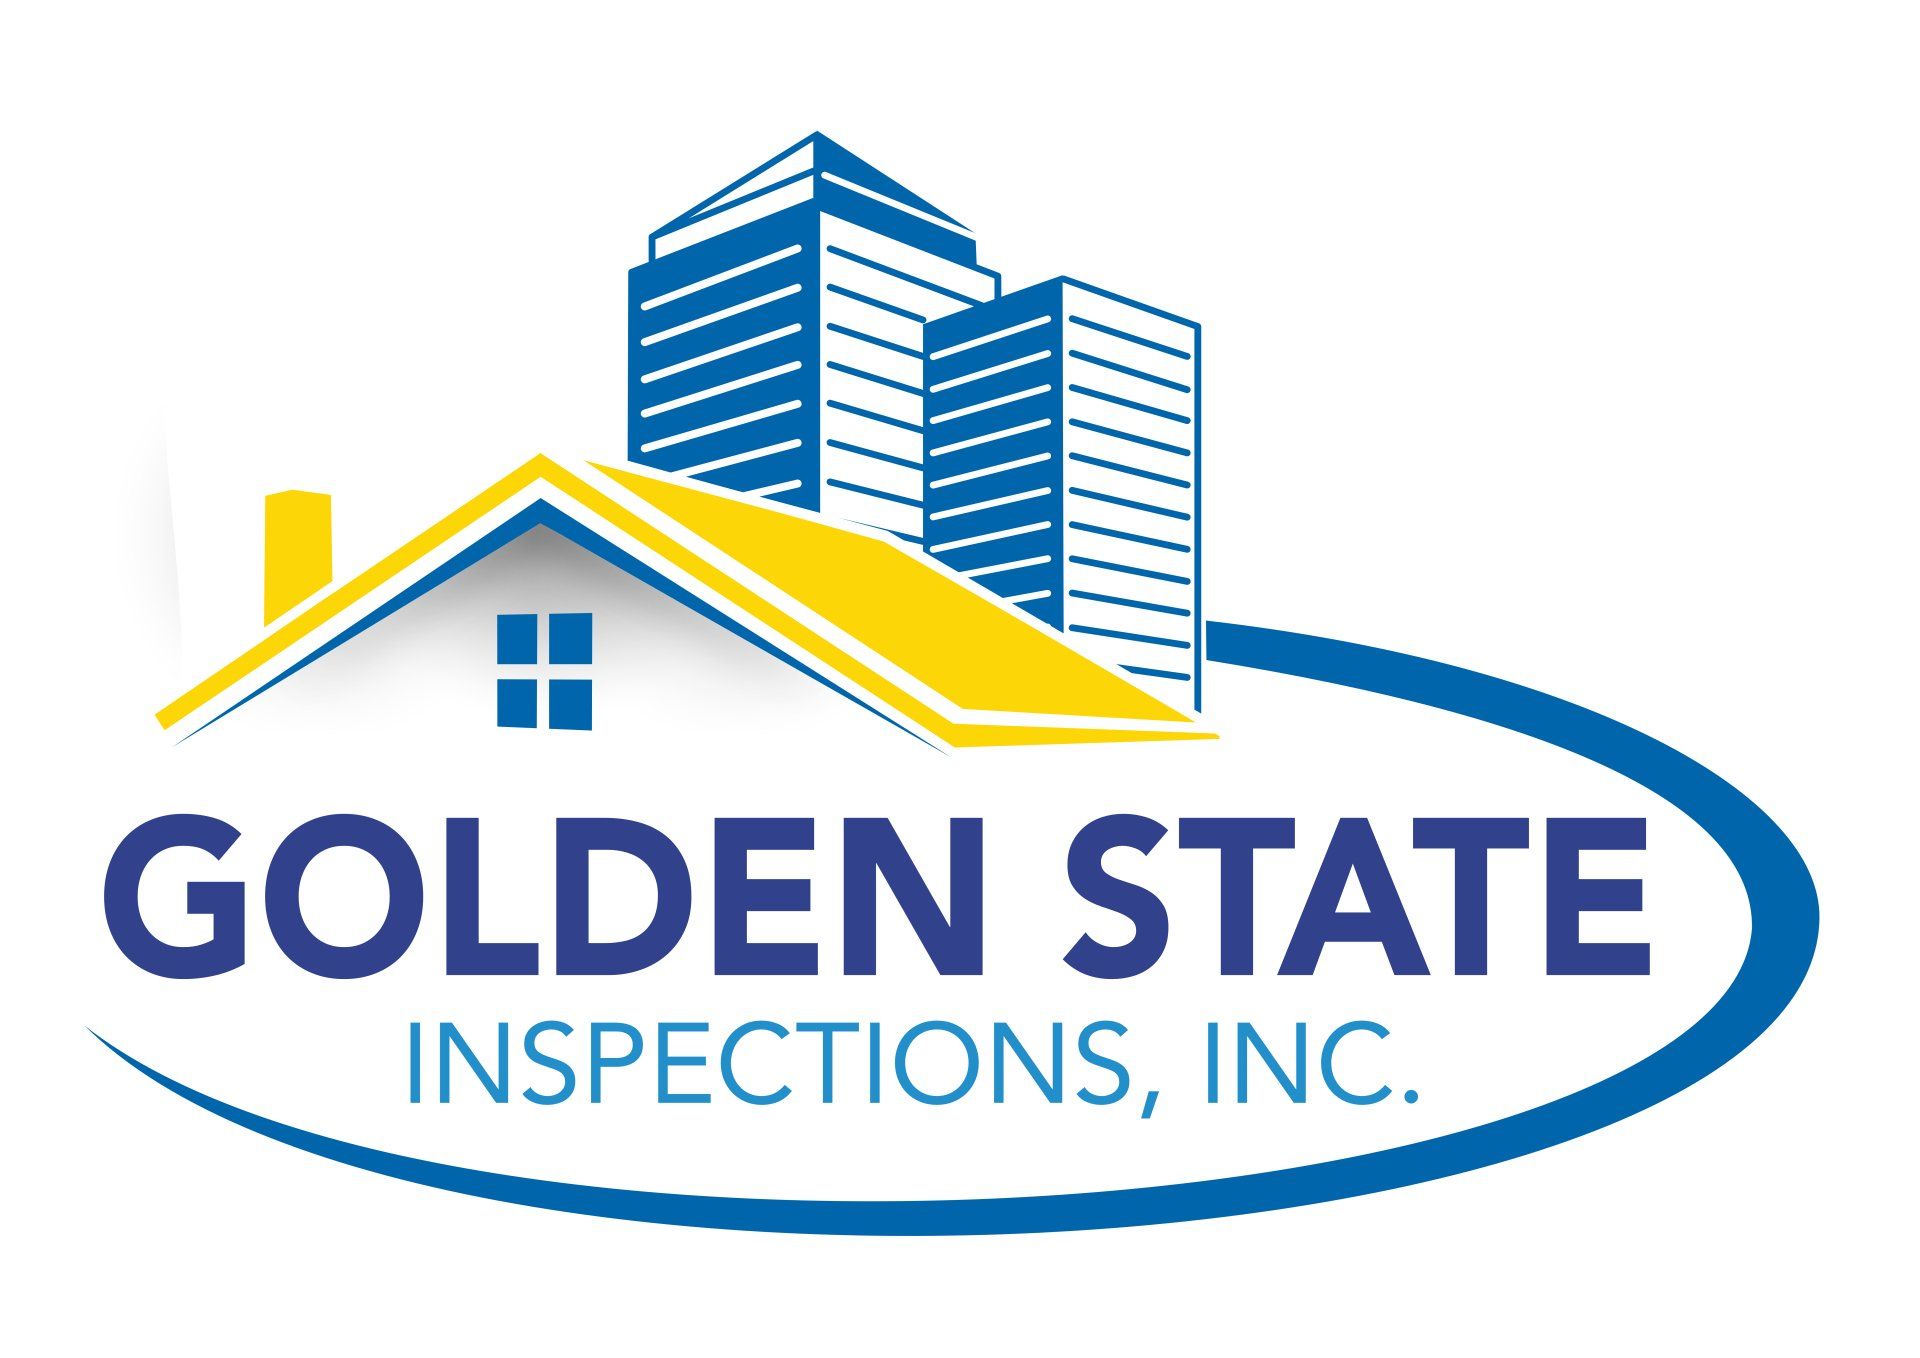 Golden State Inspection Inc